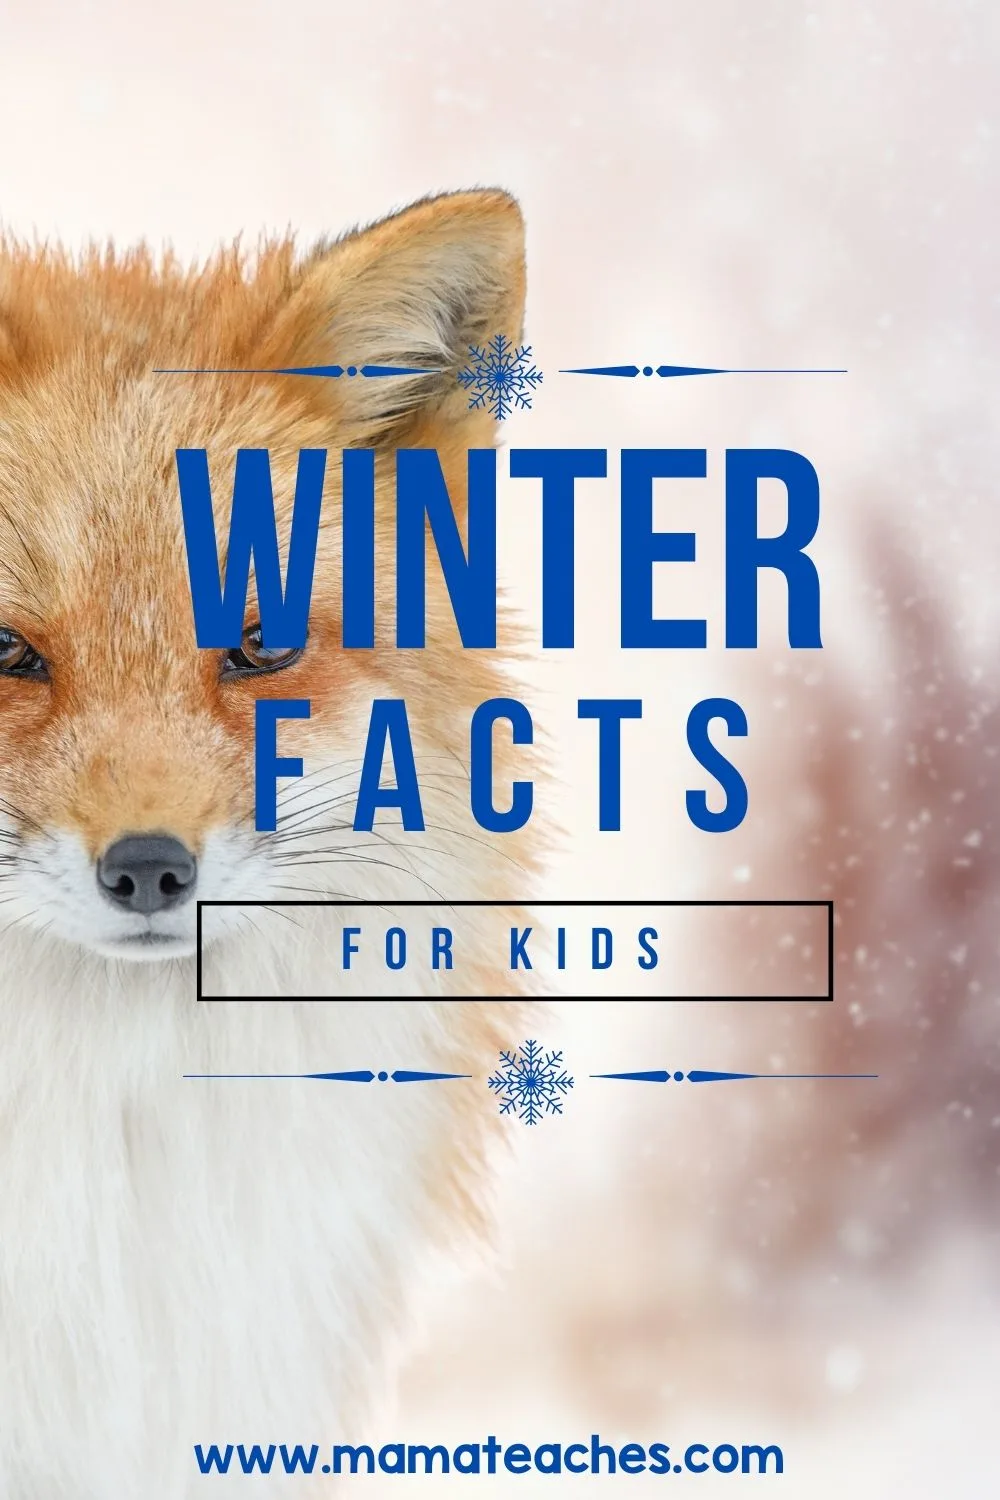 Winter Facts for Kids